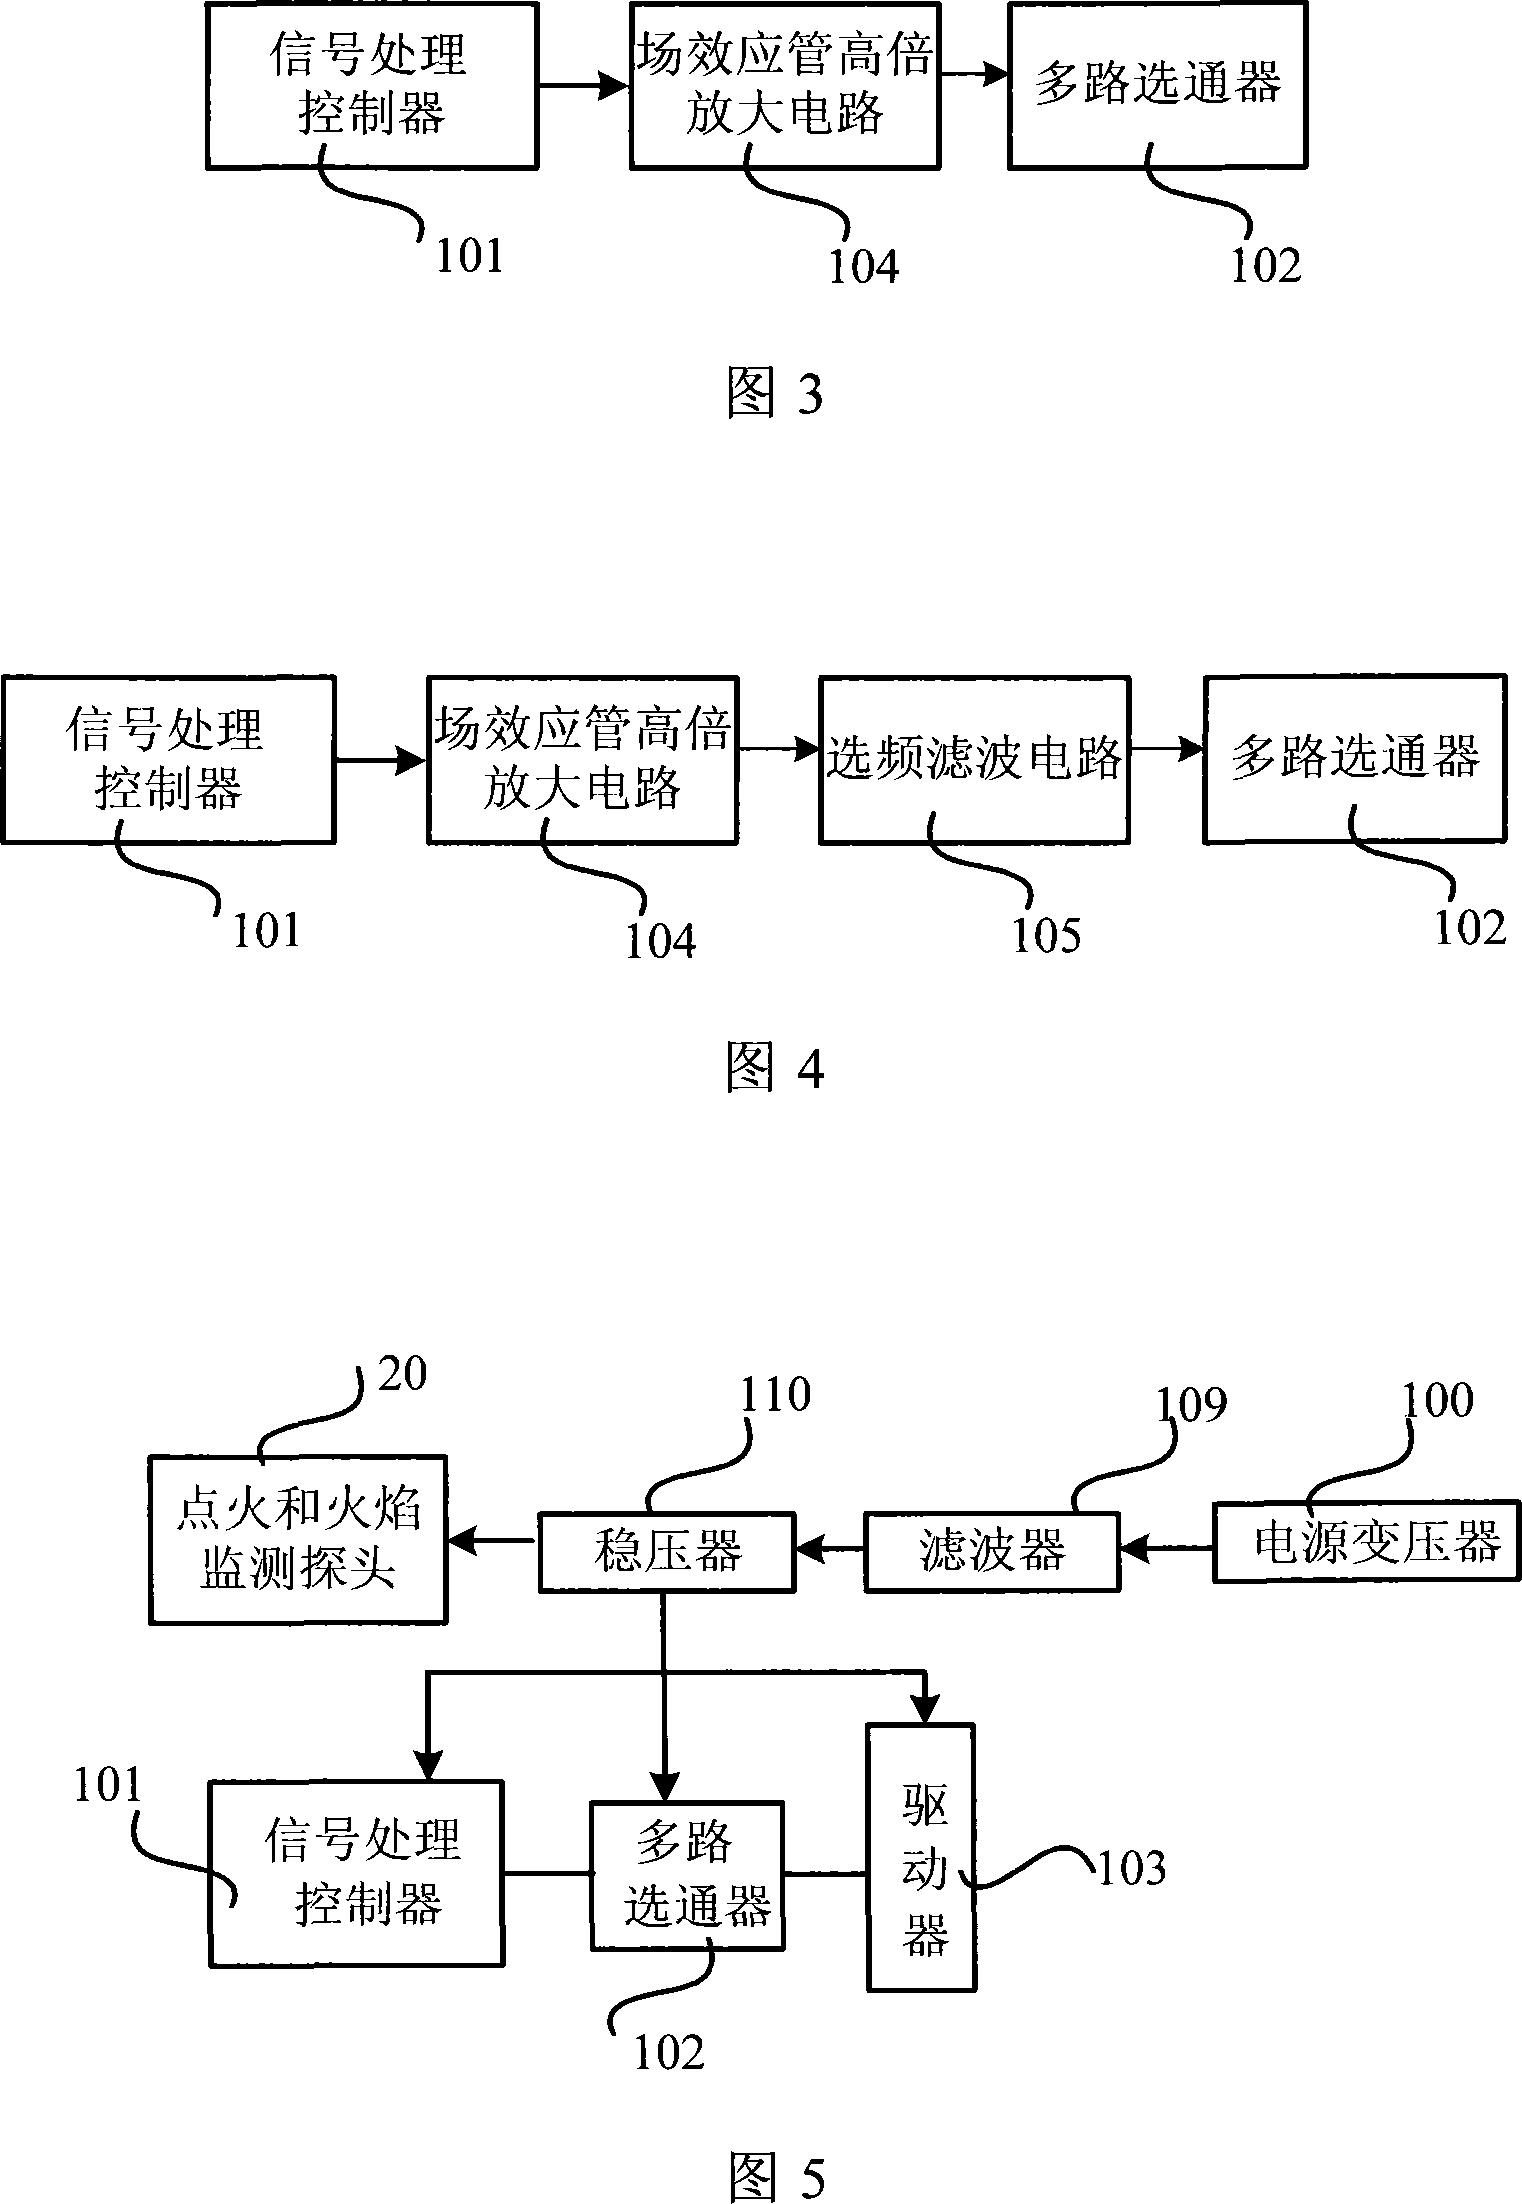 Ignition system and flame probe system